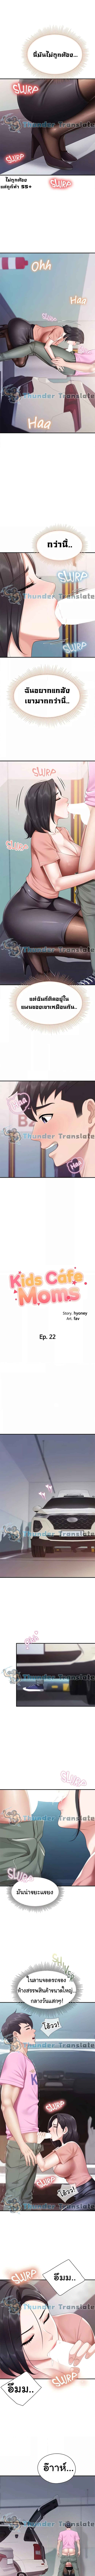 Welcome To Kids Cafe1